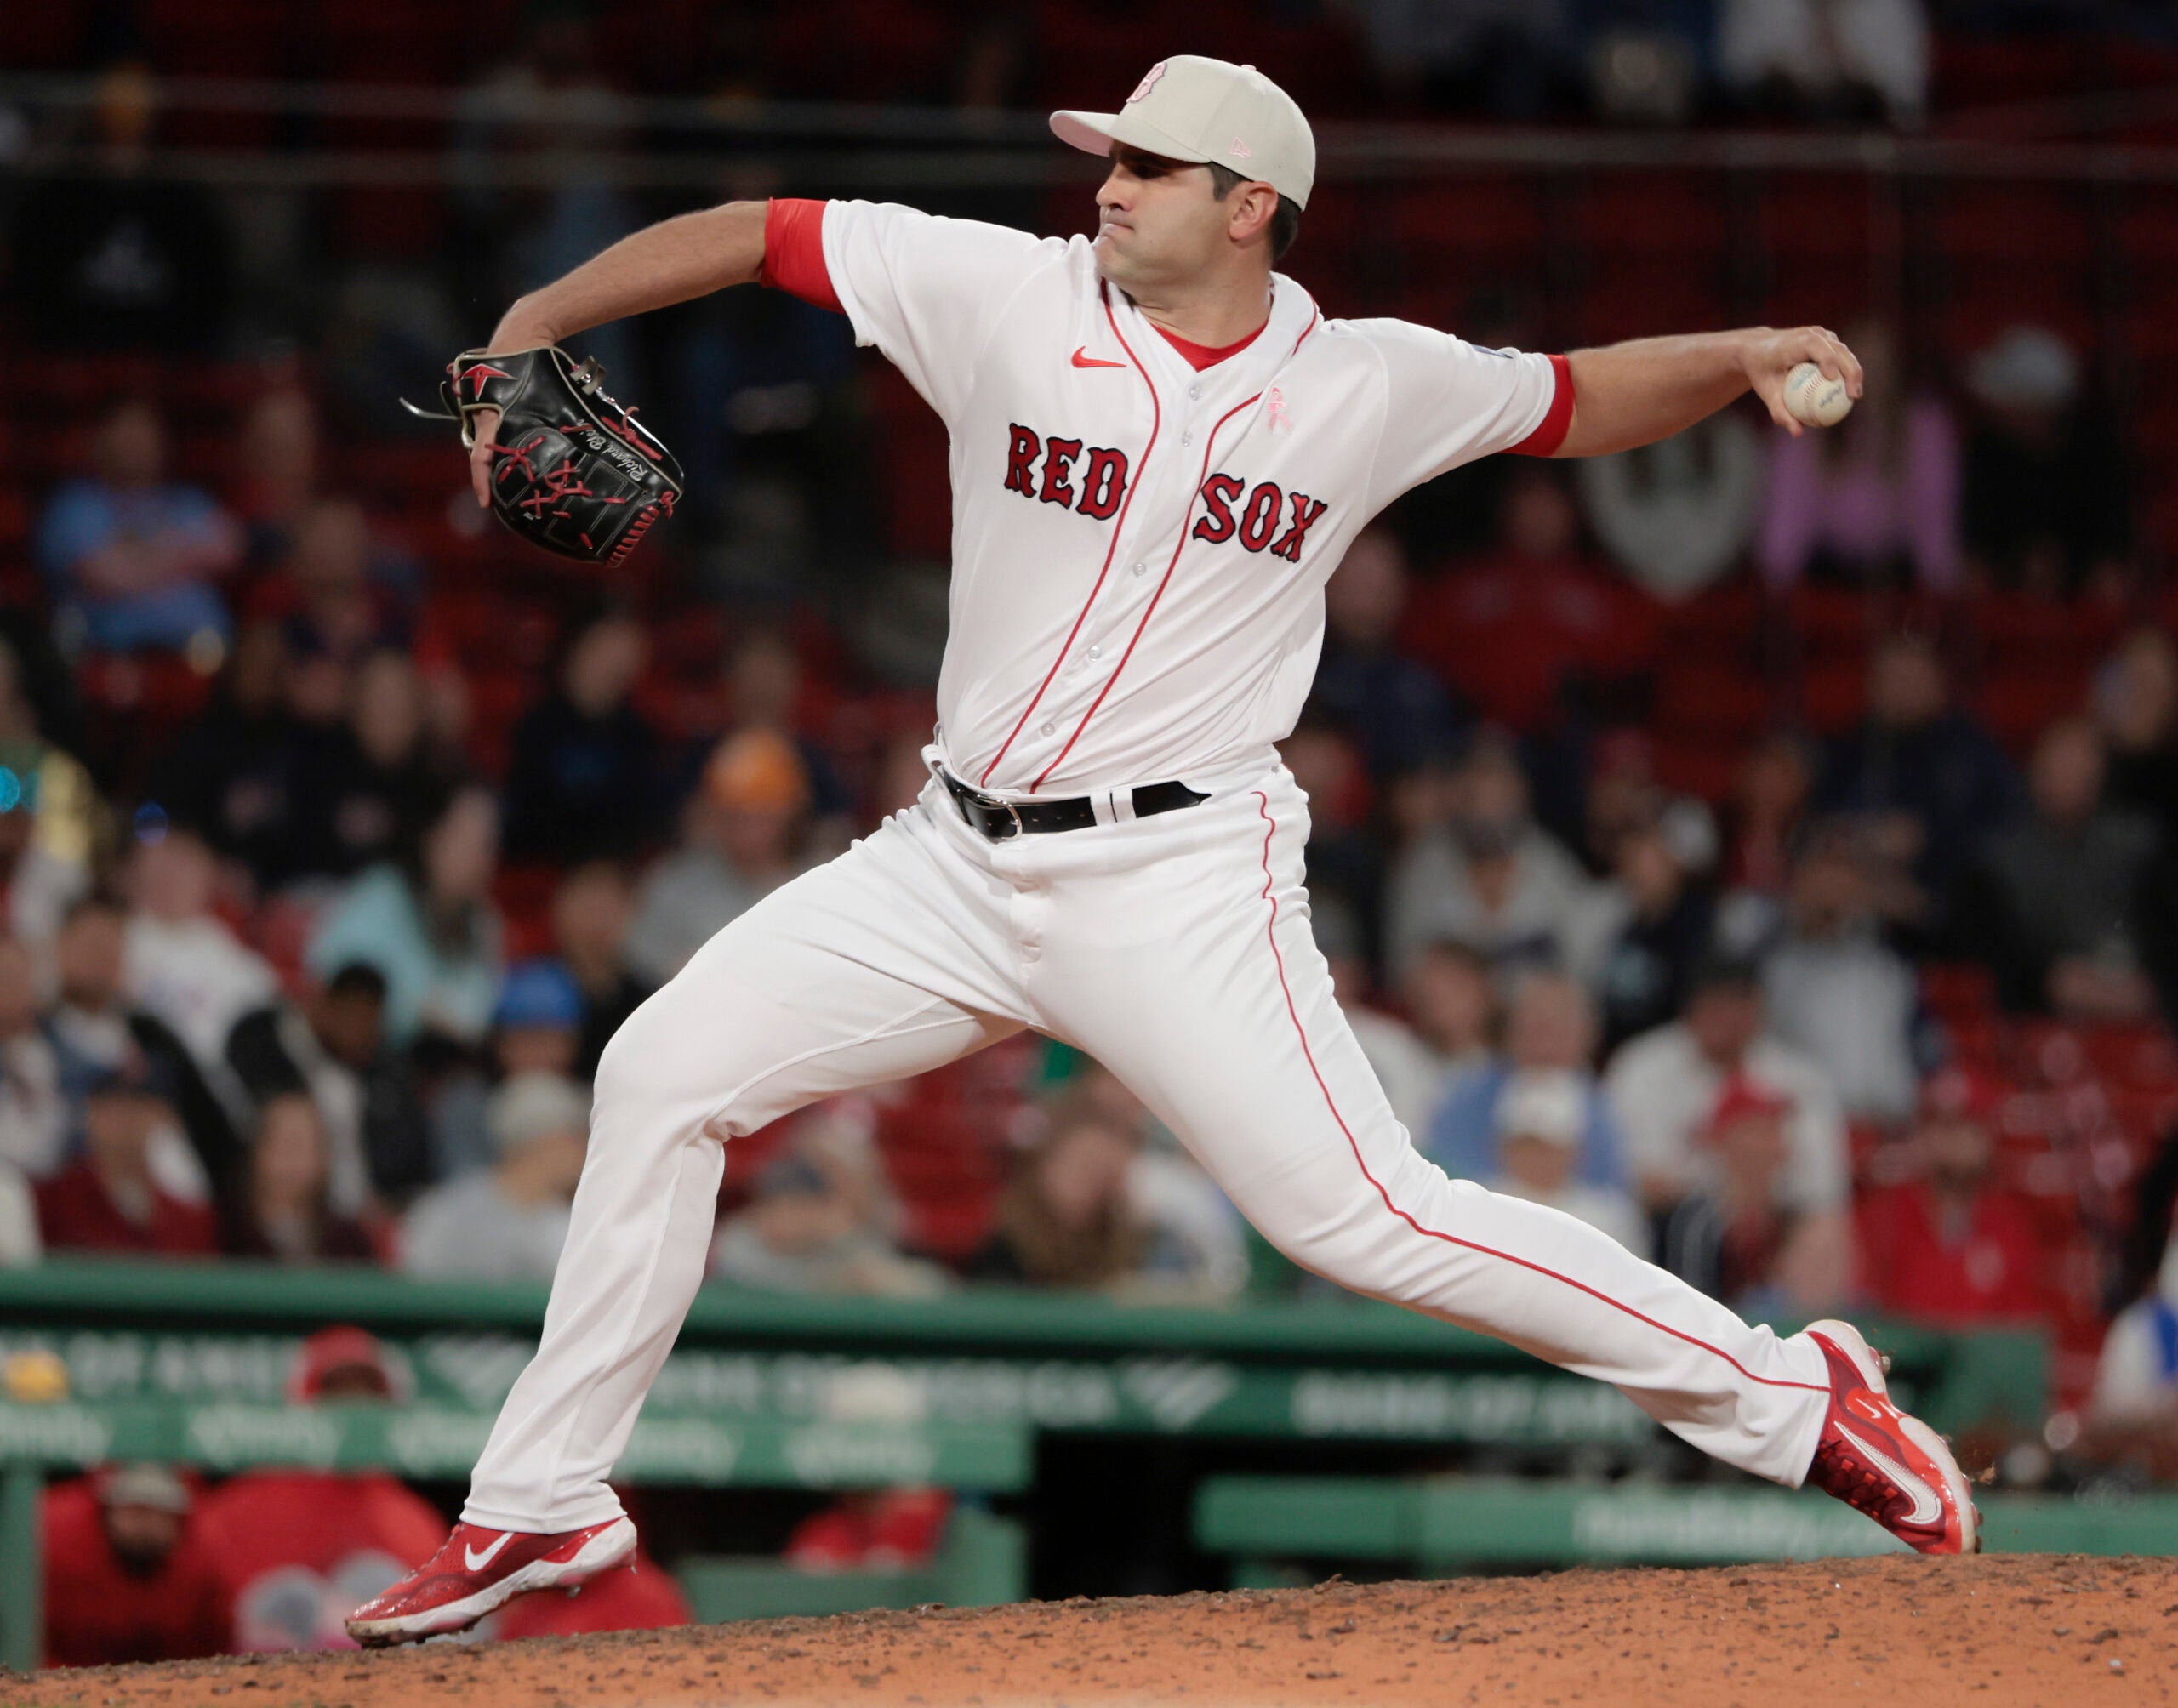 Boston Red Sox relief pitcher Richard Bleier (35) delivers a pitch against the St. Louis Cardinals during ninth inning action at Fenway Park.